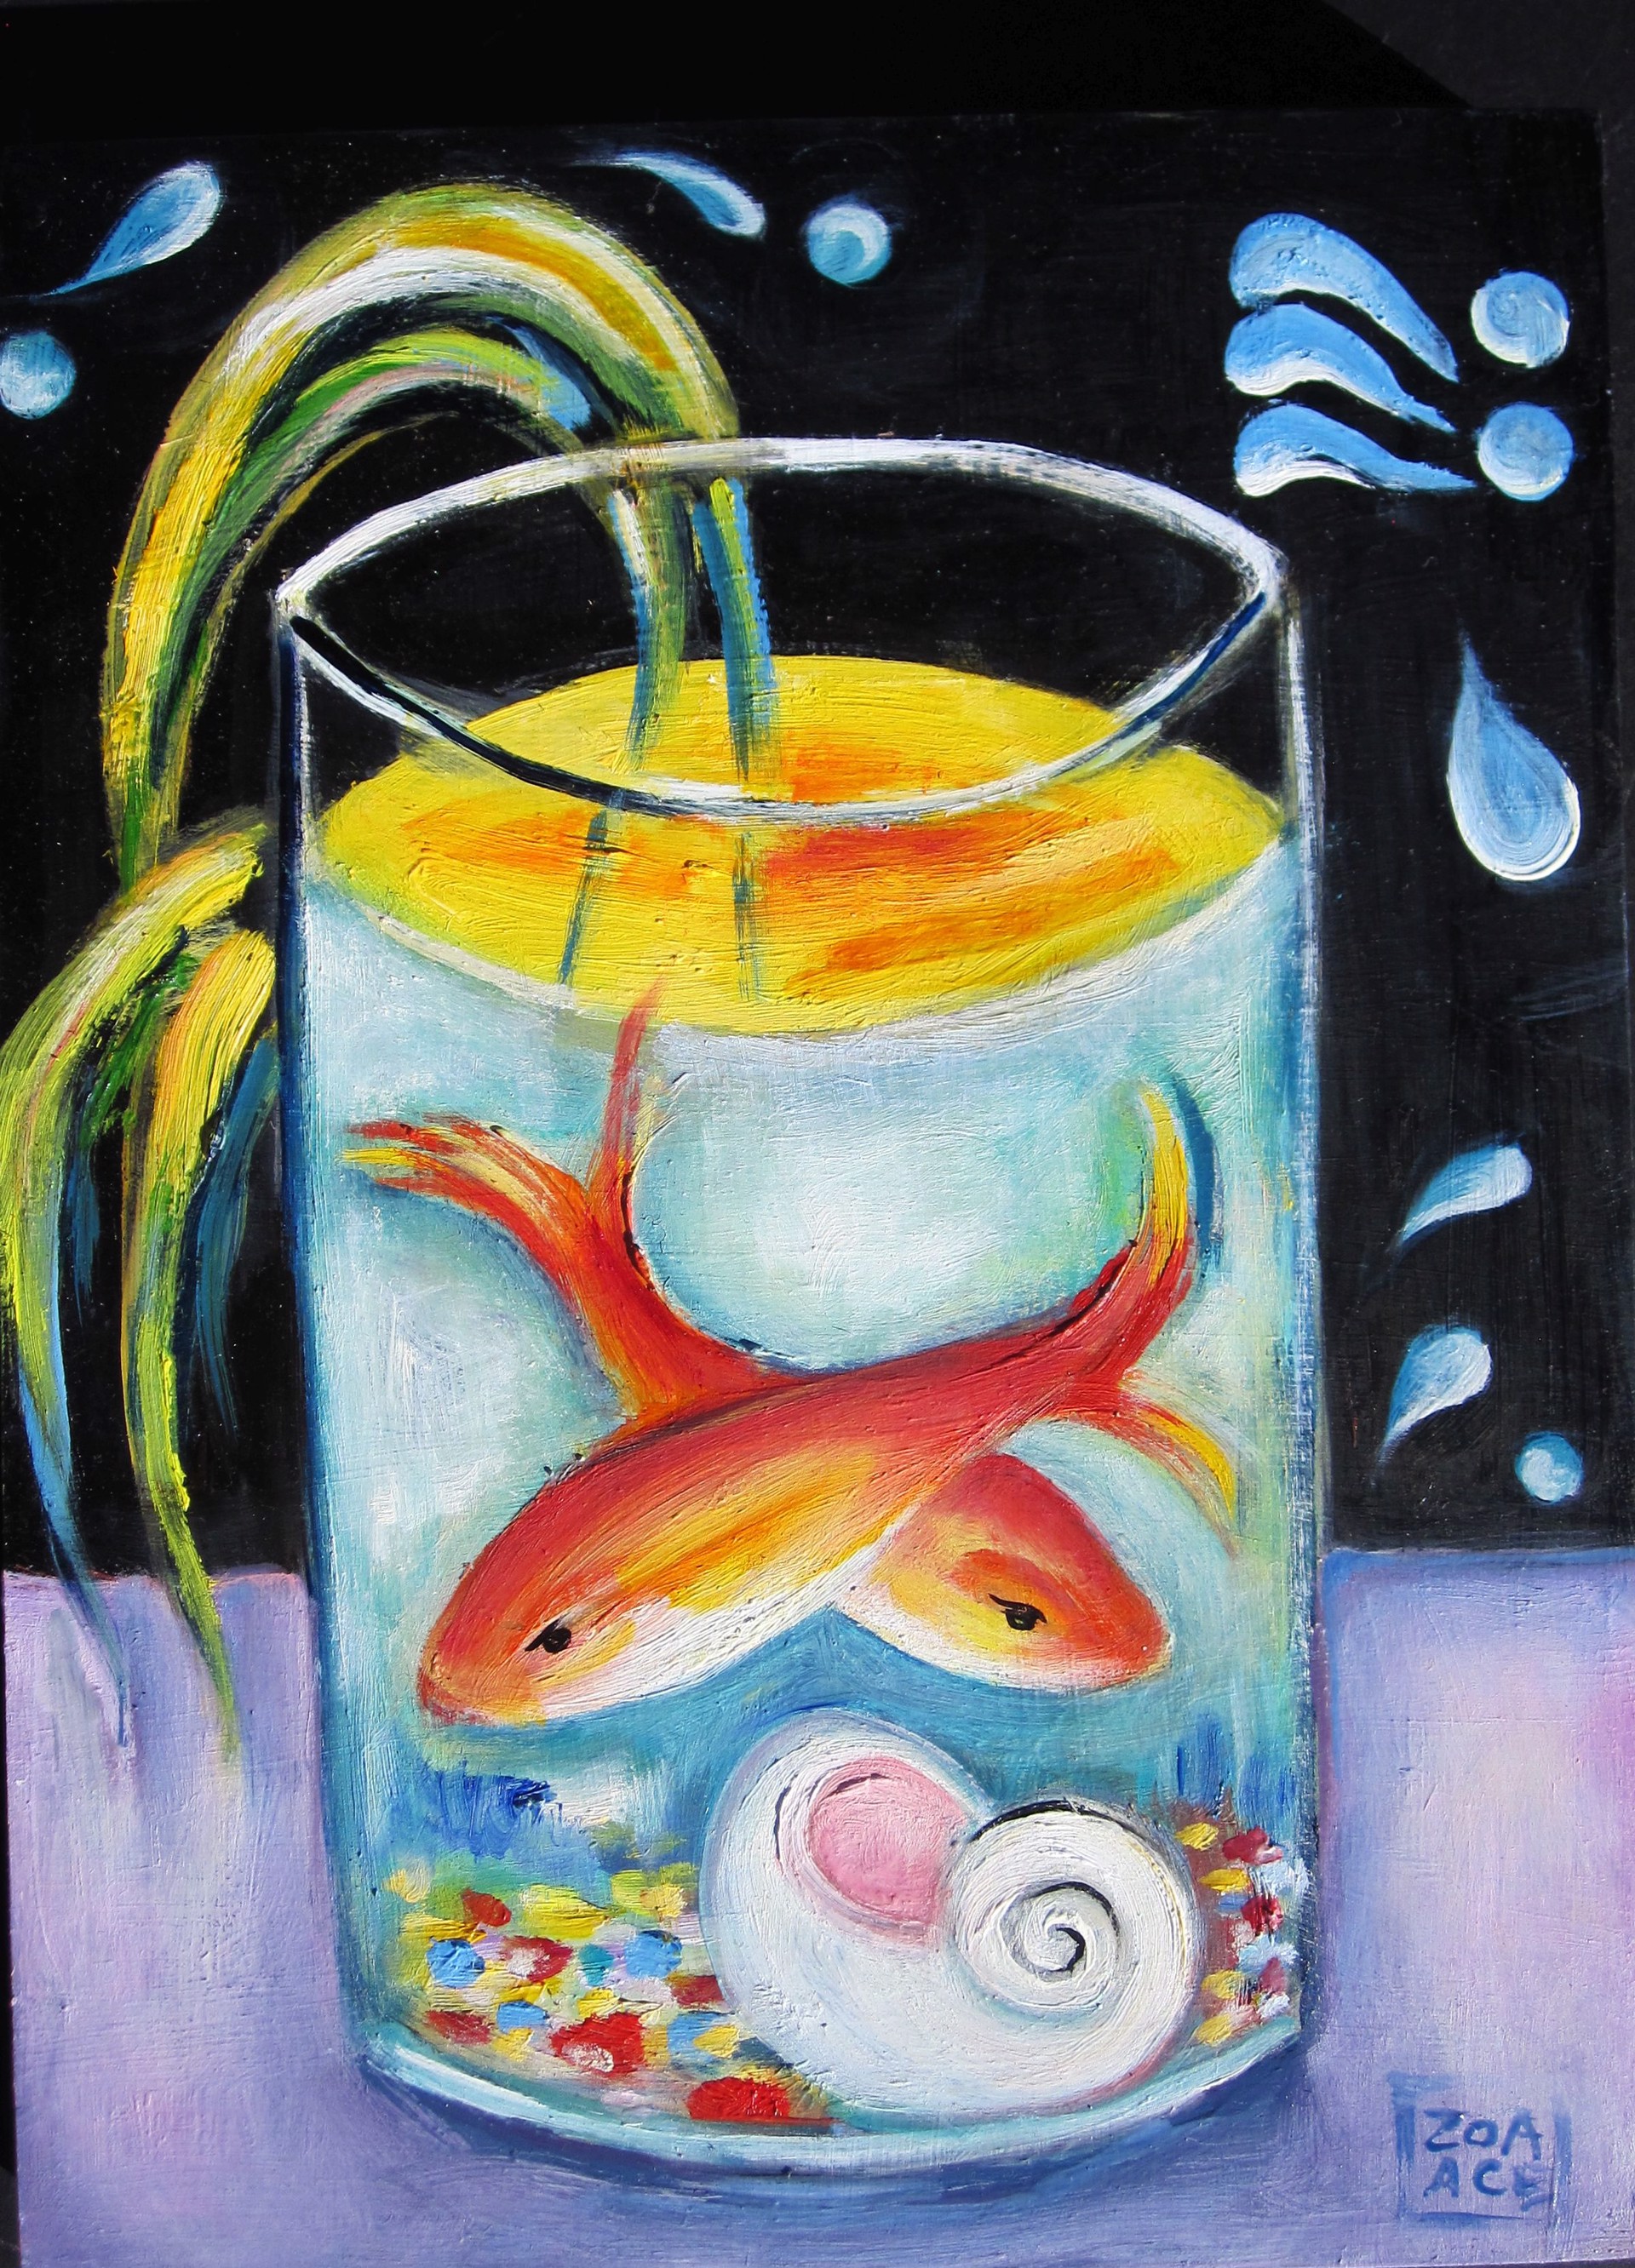 Fish Bowl by Zoa Ace